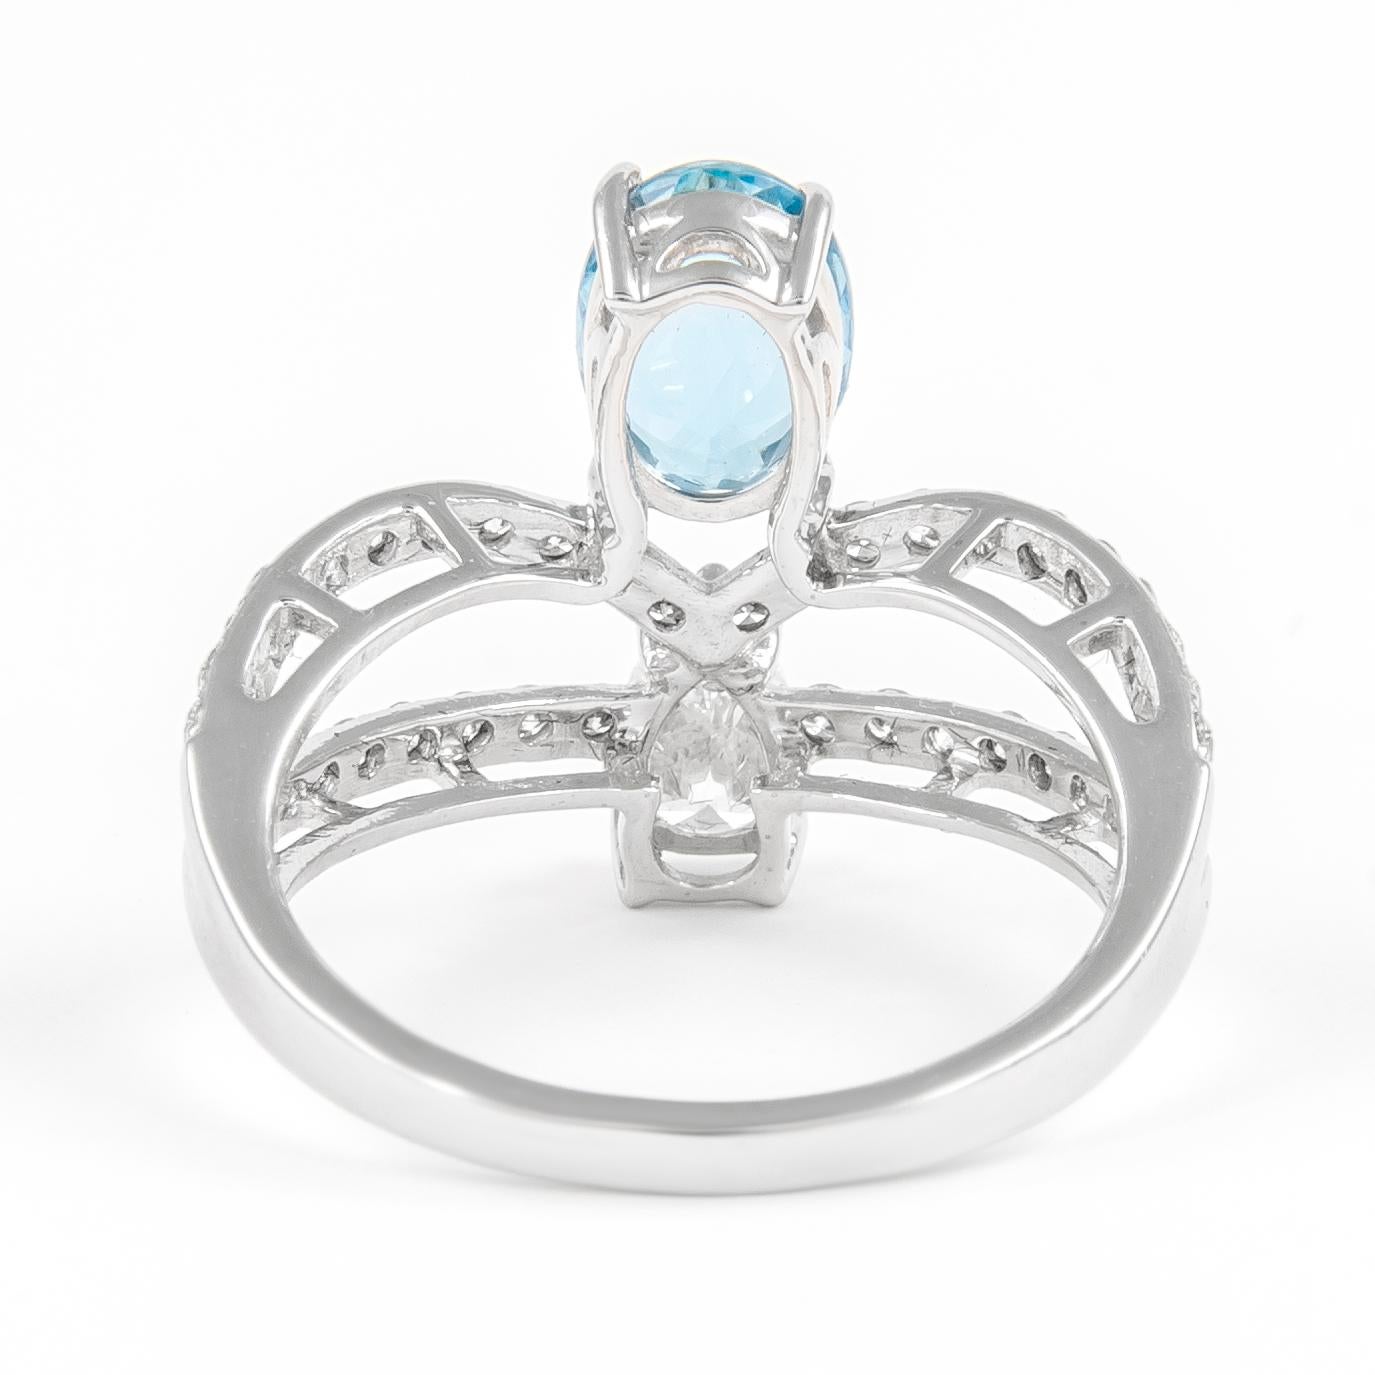 Oval Cut Alexander 1.81 Carat Oval Aquamarine and Pear Diamond Ring 18k White Gold